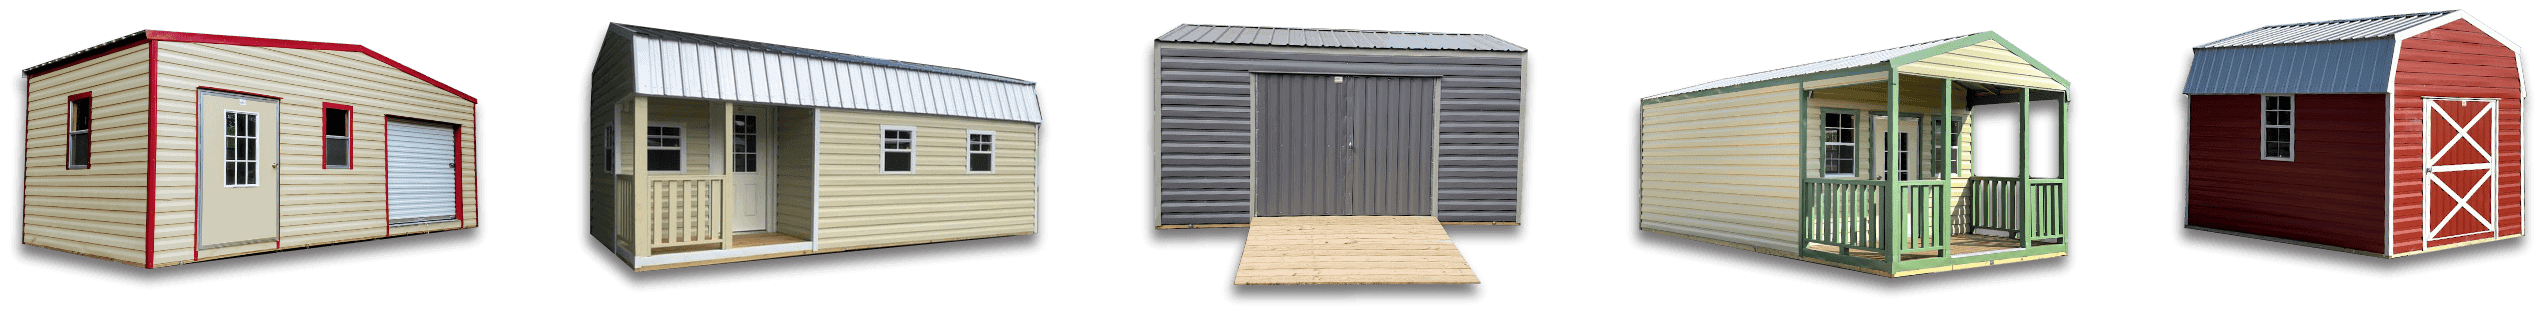 12x50 portable storage shed for sale - Explore our shed styles at Robin Sheds